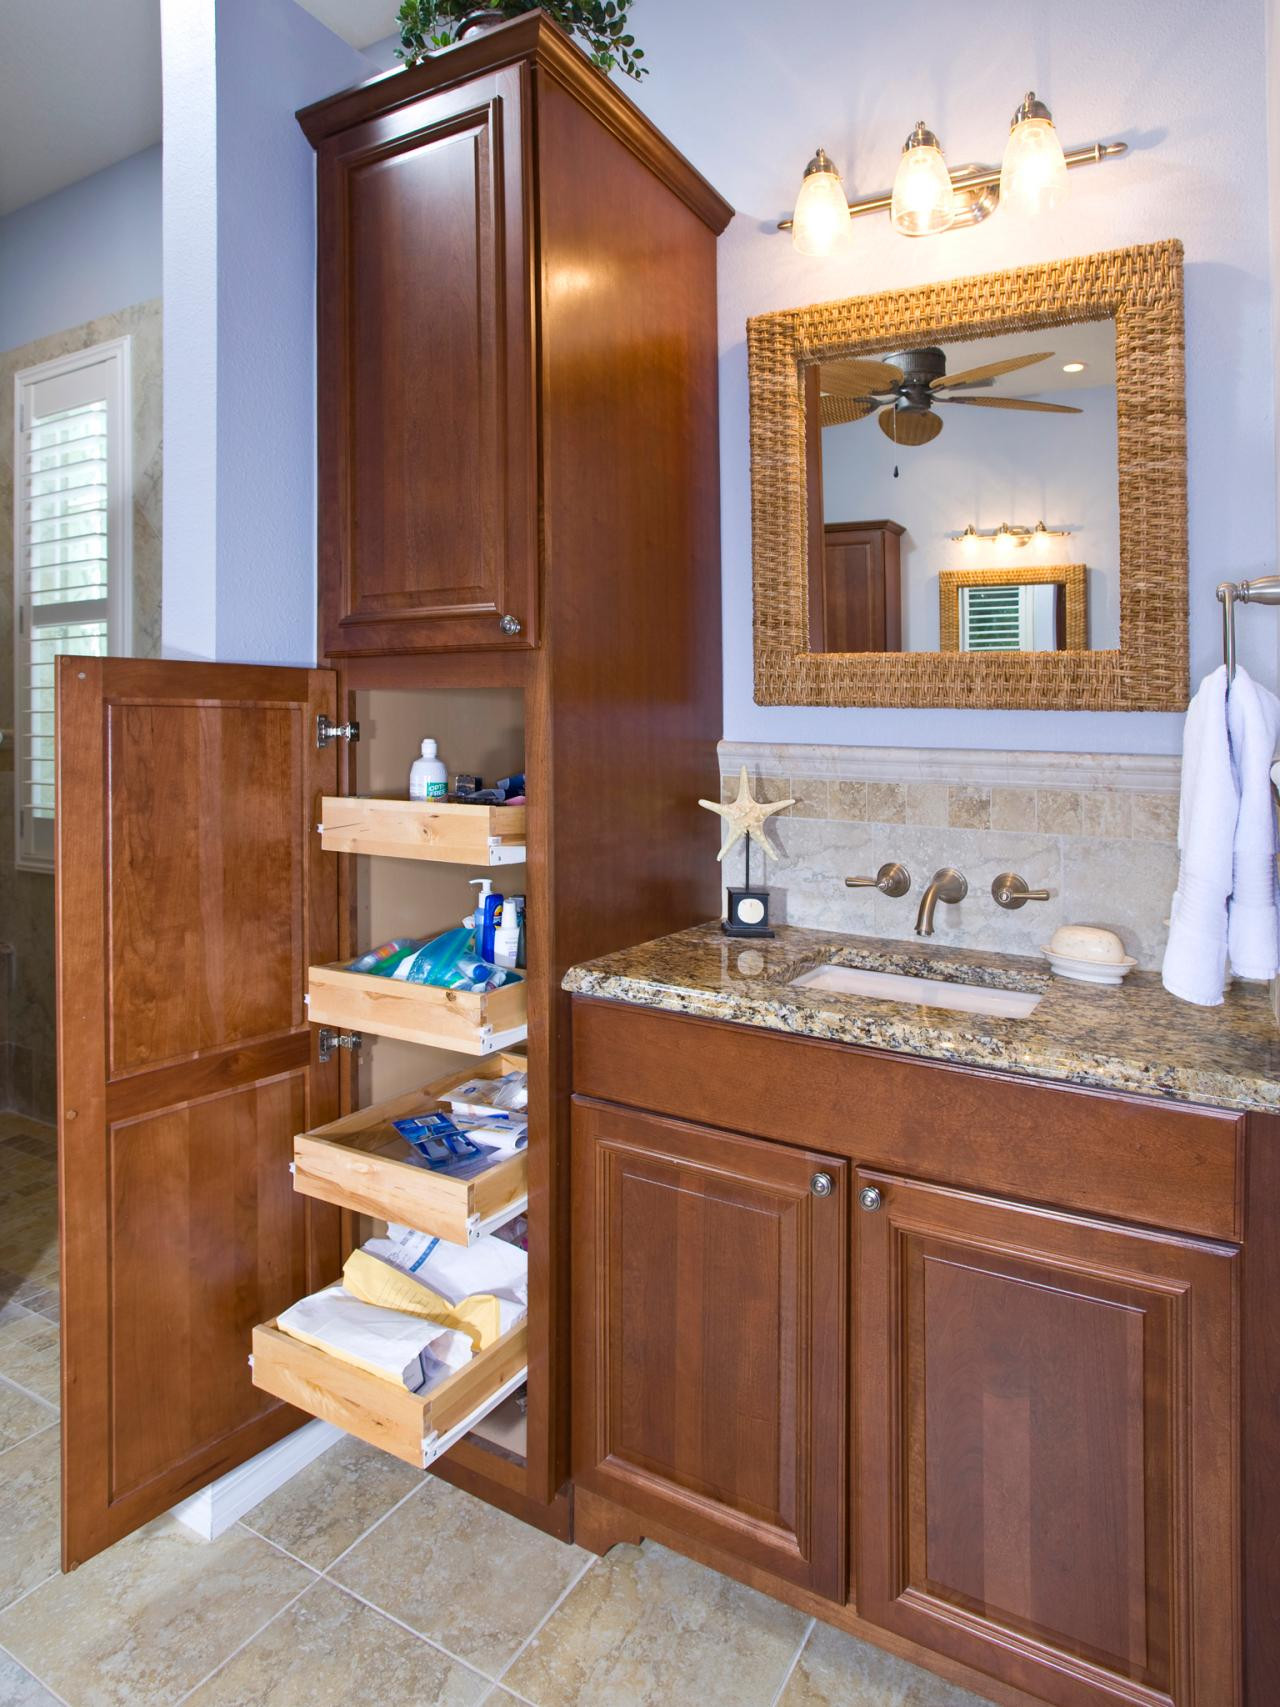 Lowes Bathroom Storage
 Bathroom Lowes Bathroom Design For Your Bathroom